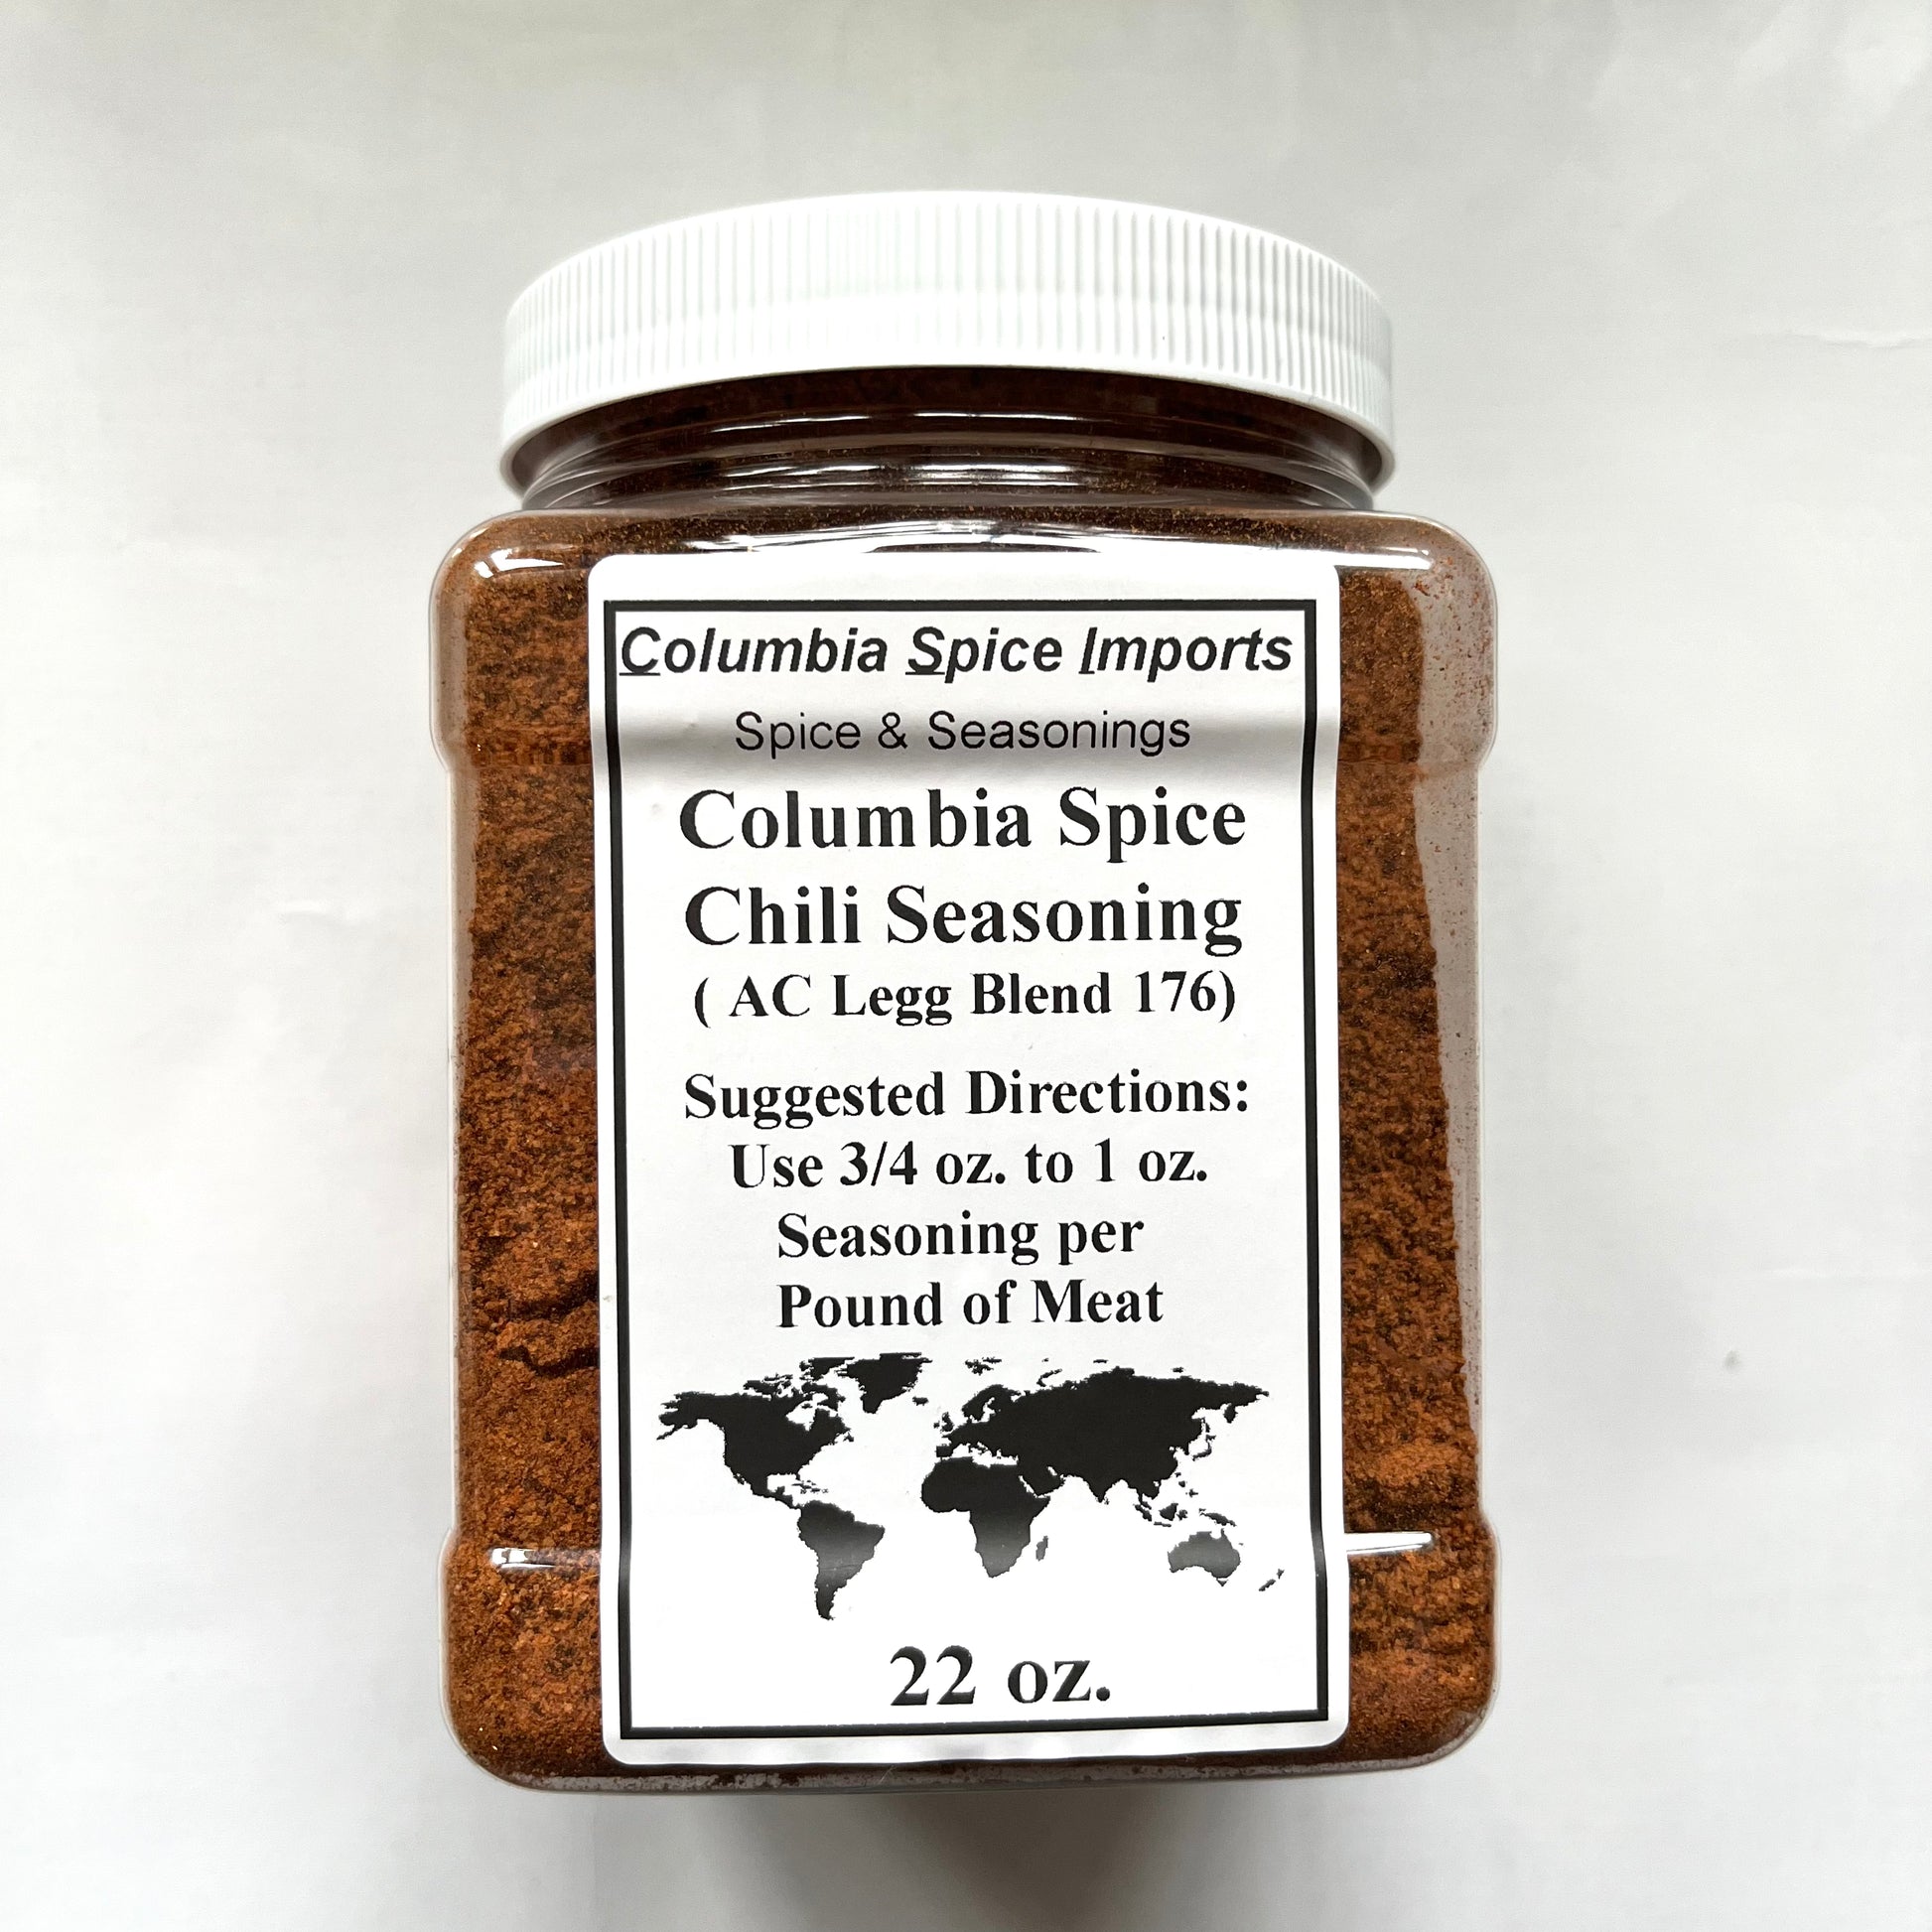 Claremont Spice and Dry Goods – Pho seasoning blend